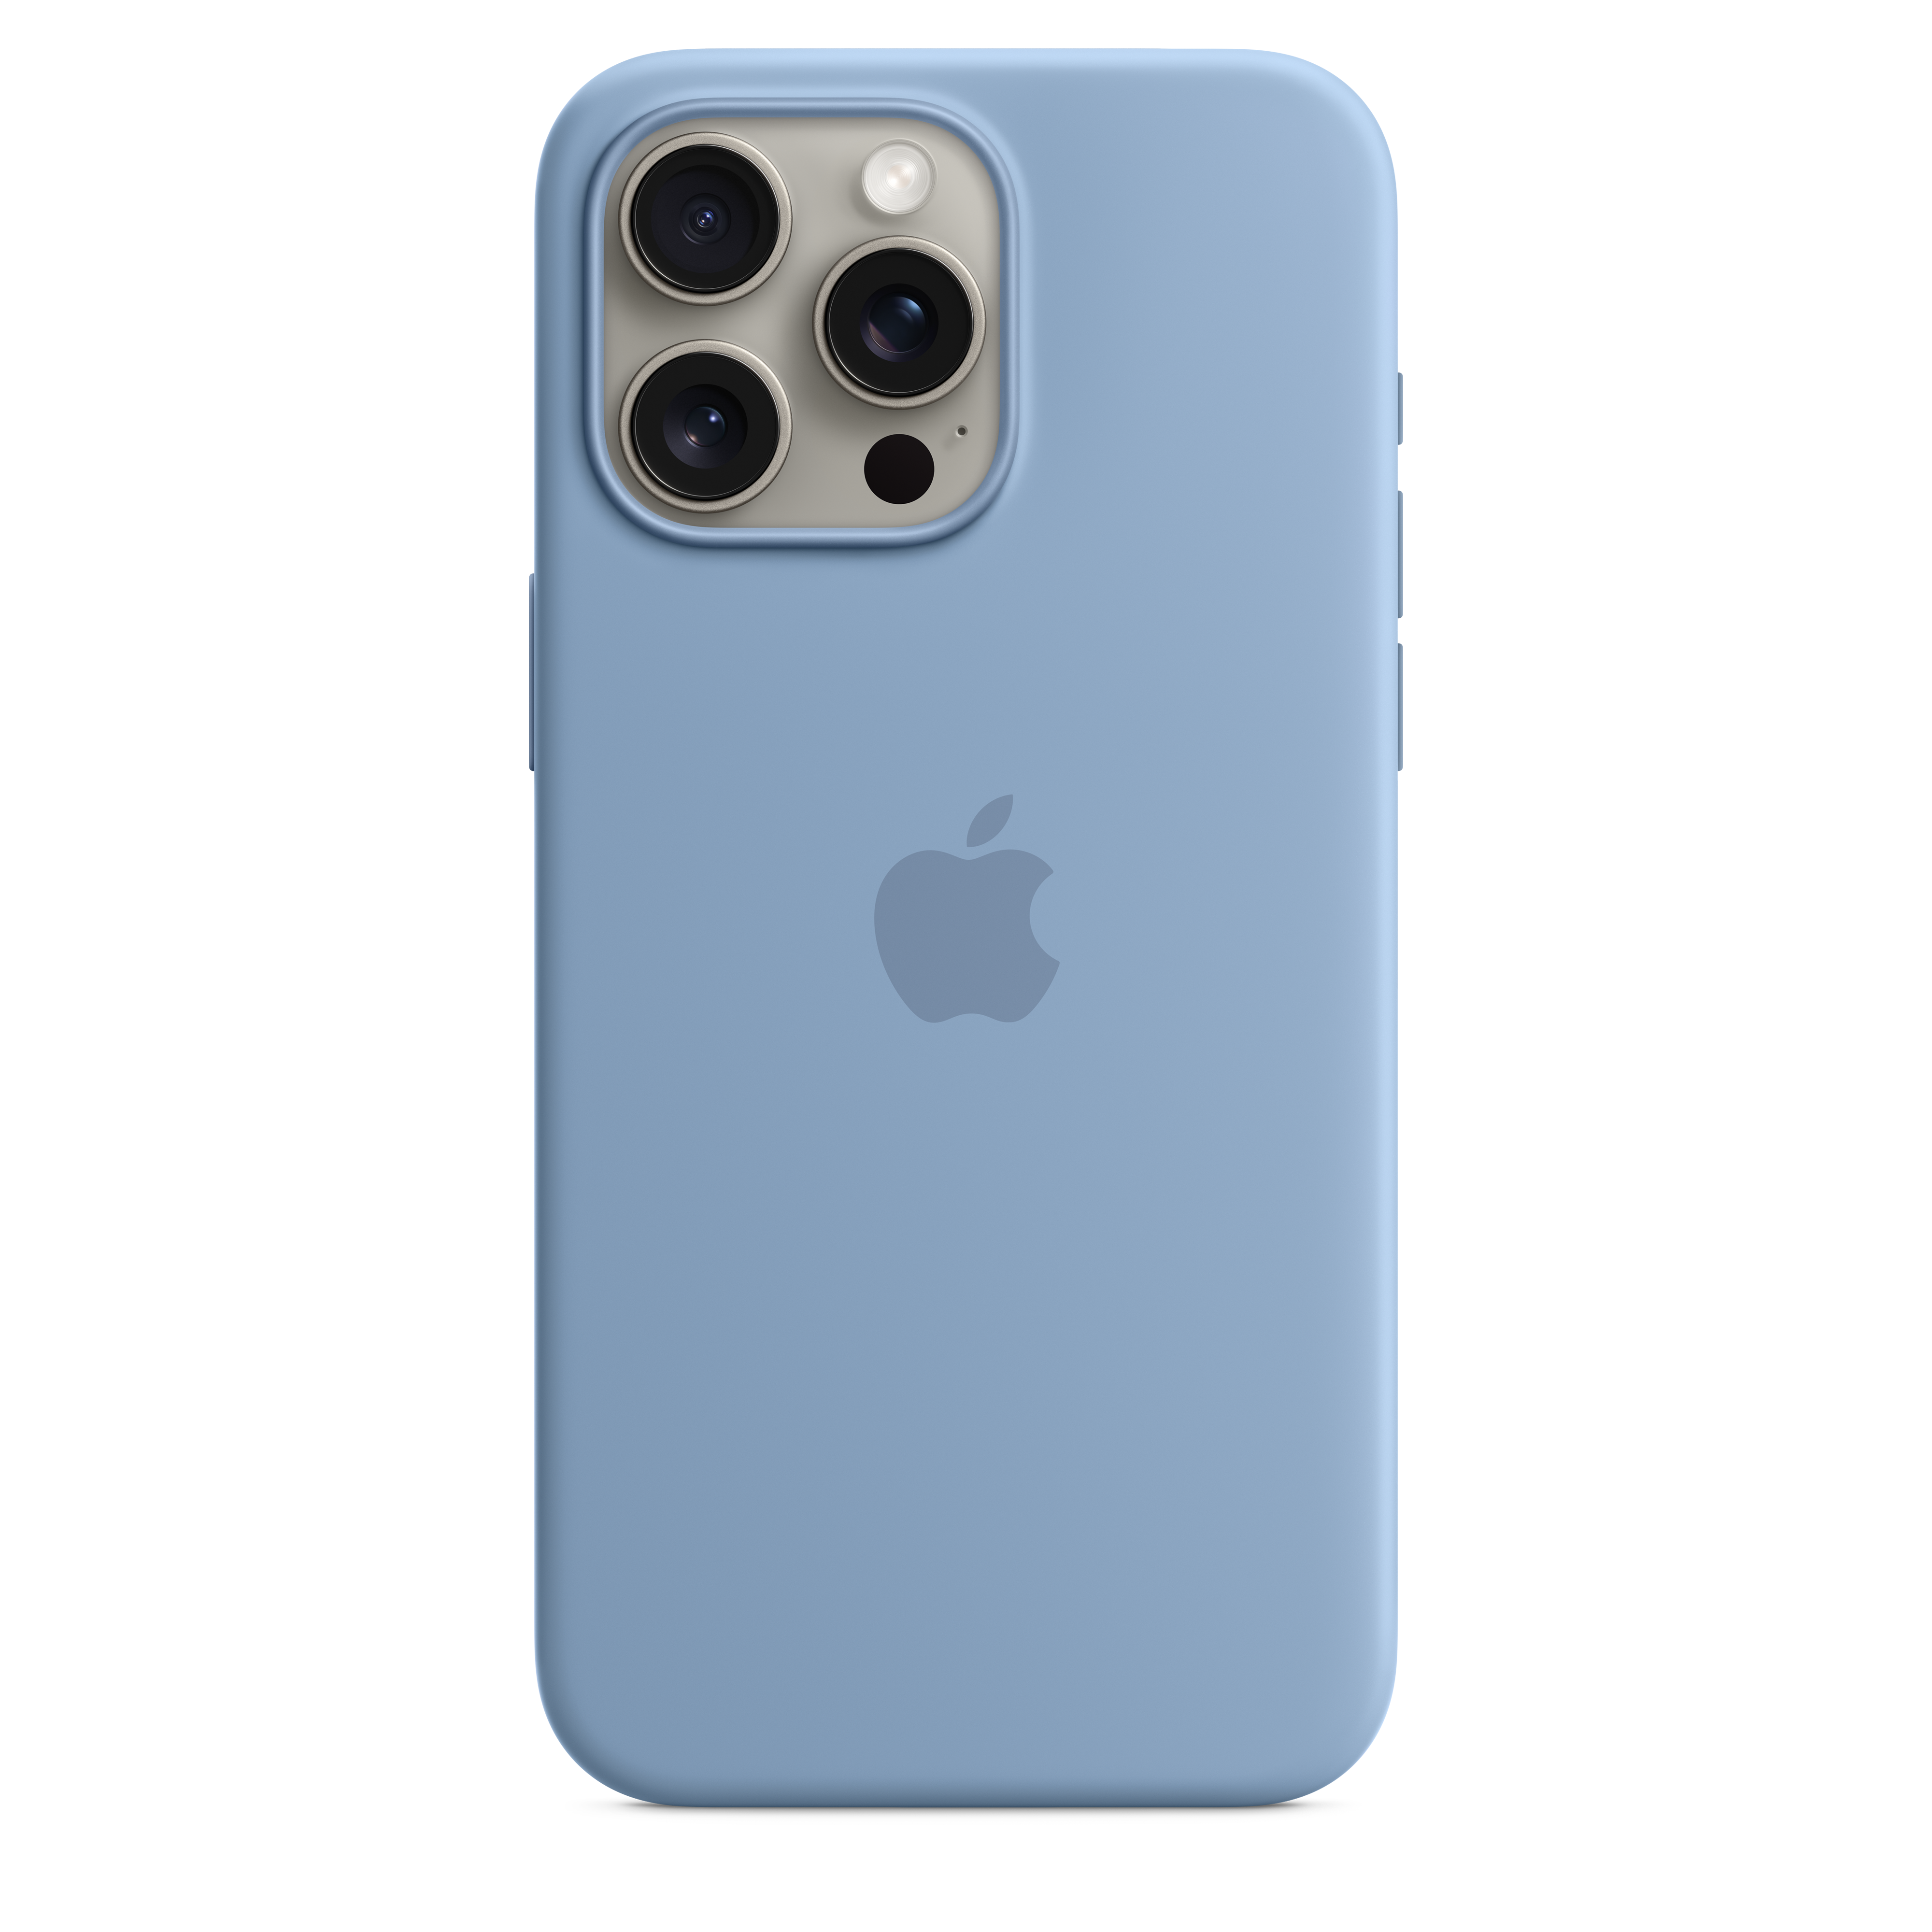 iPhone 12 Pro Max Silicone Case with MagSafe - Capri Blue